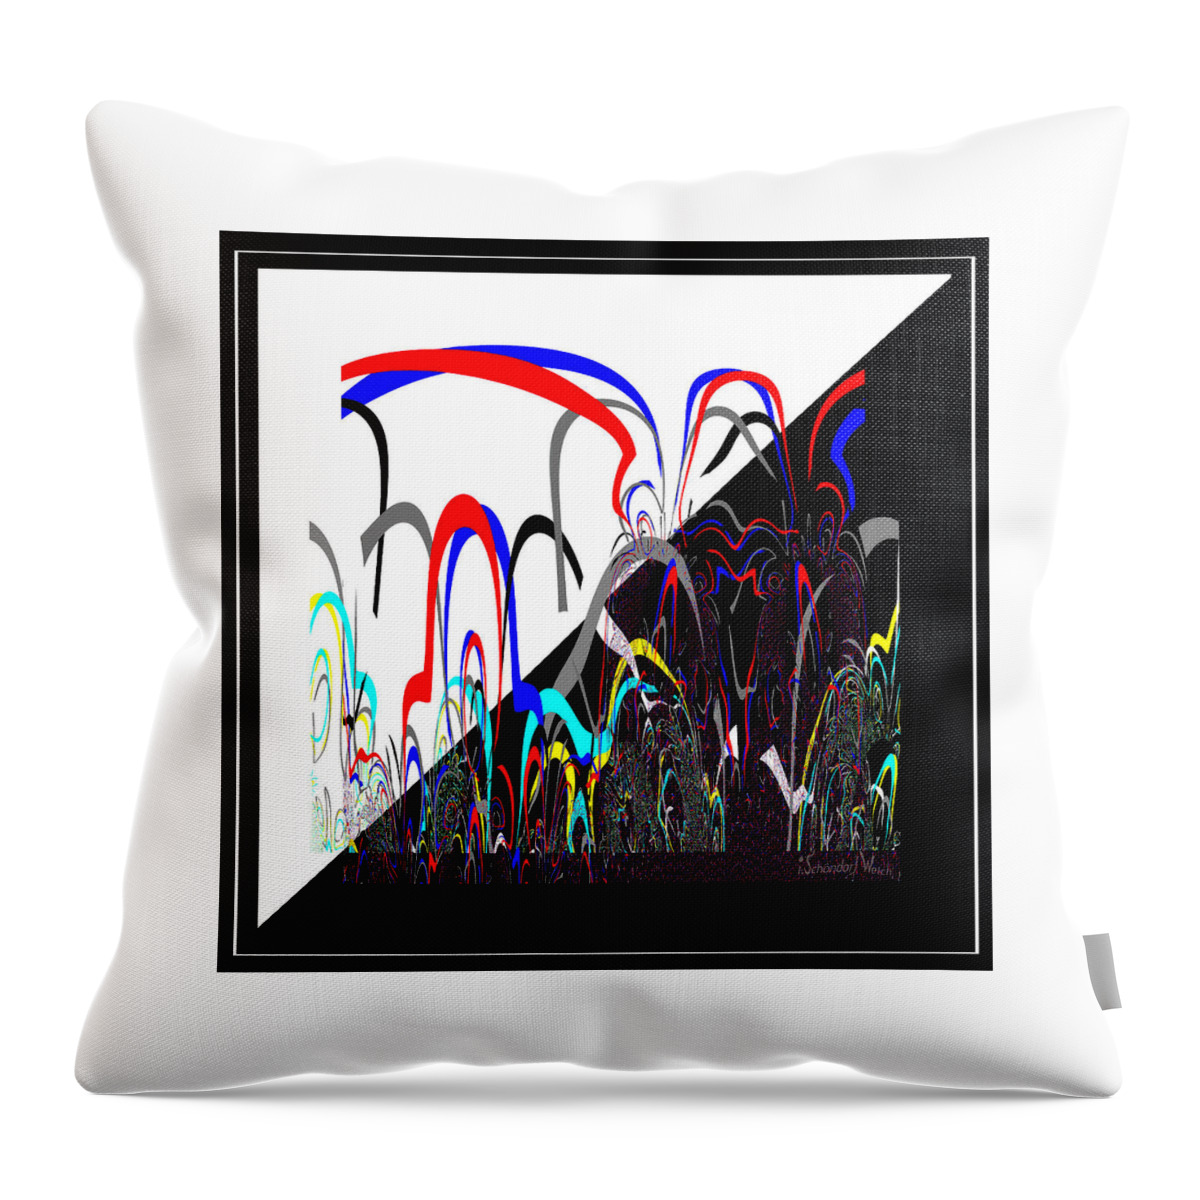 1288 Throw Pillow featuring the painting 1288 Deco Deco by Irmgard Schoendorf Welch